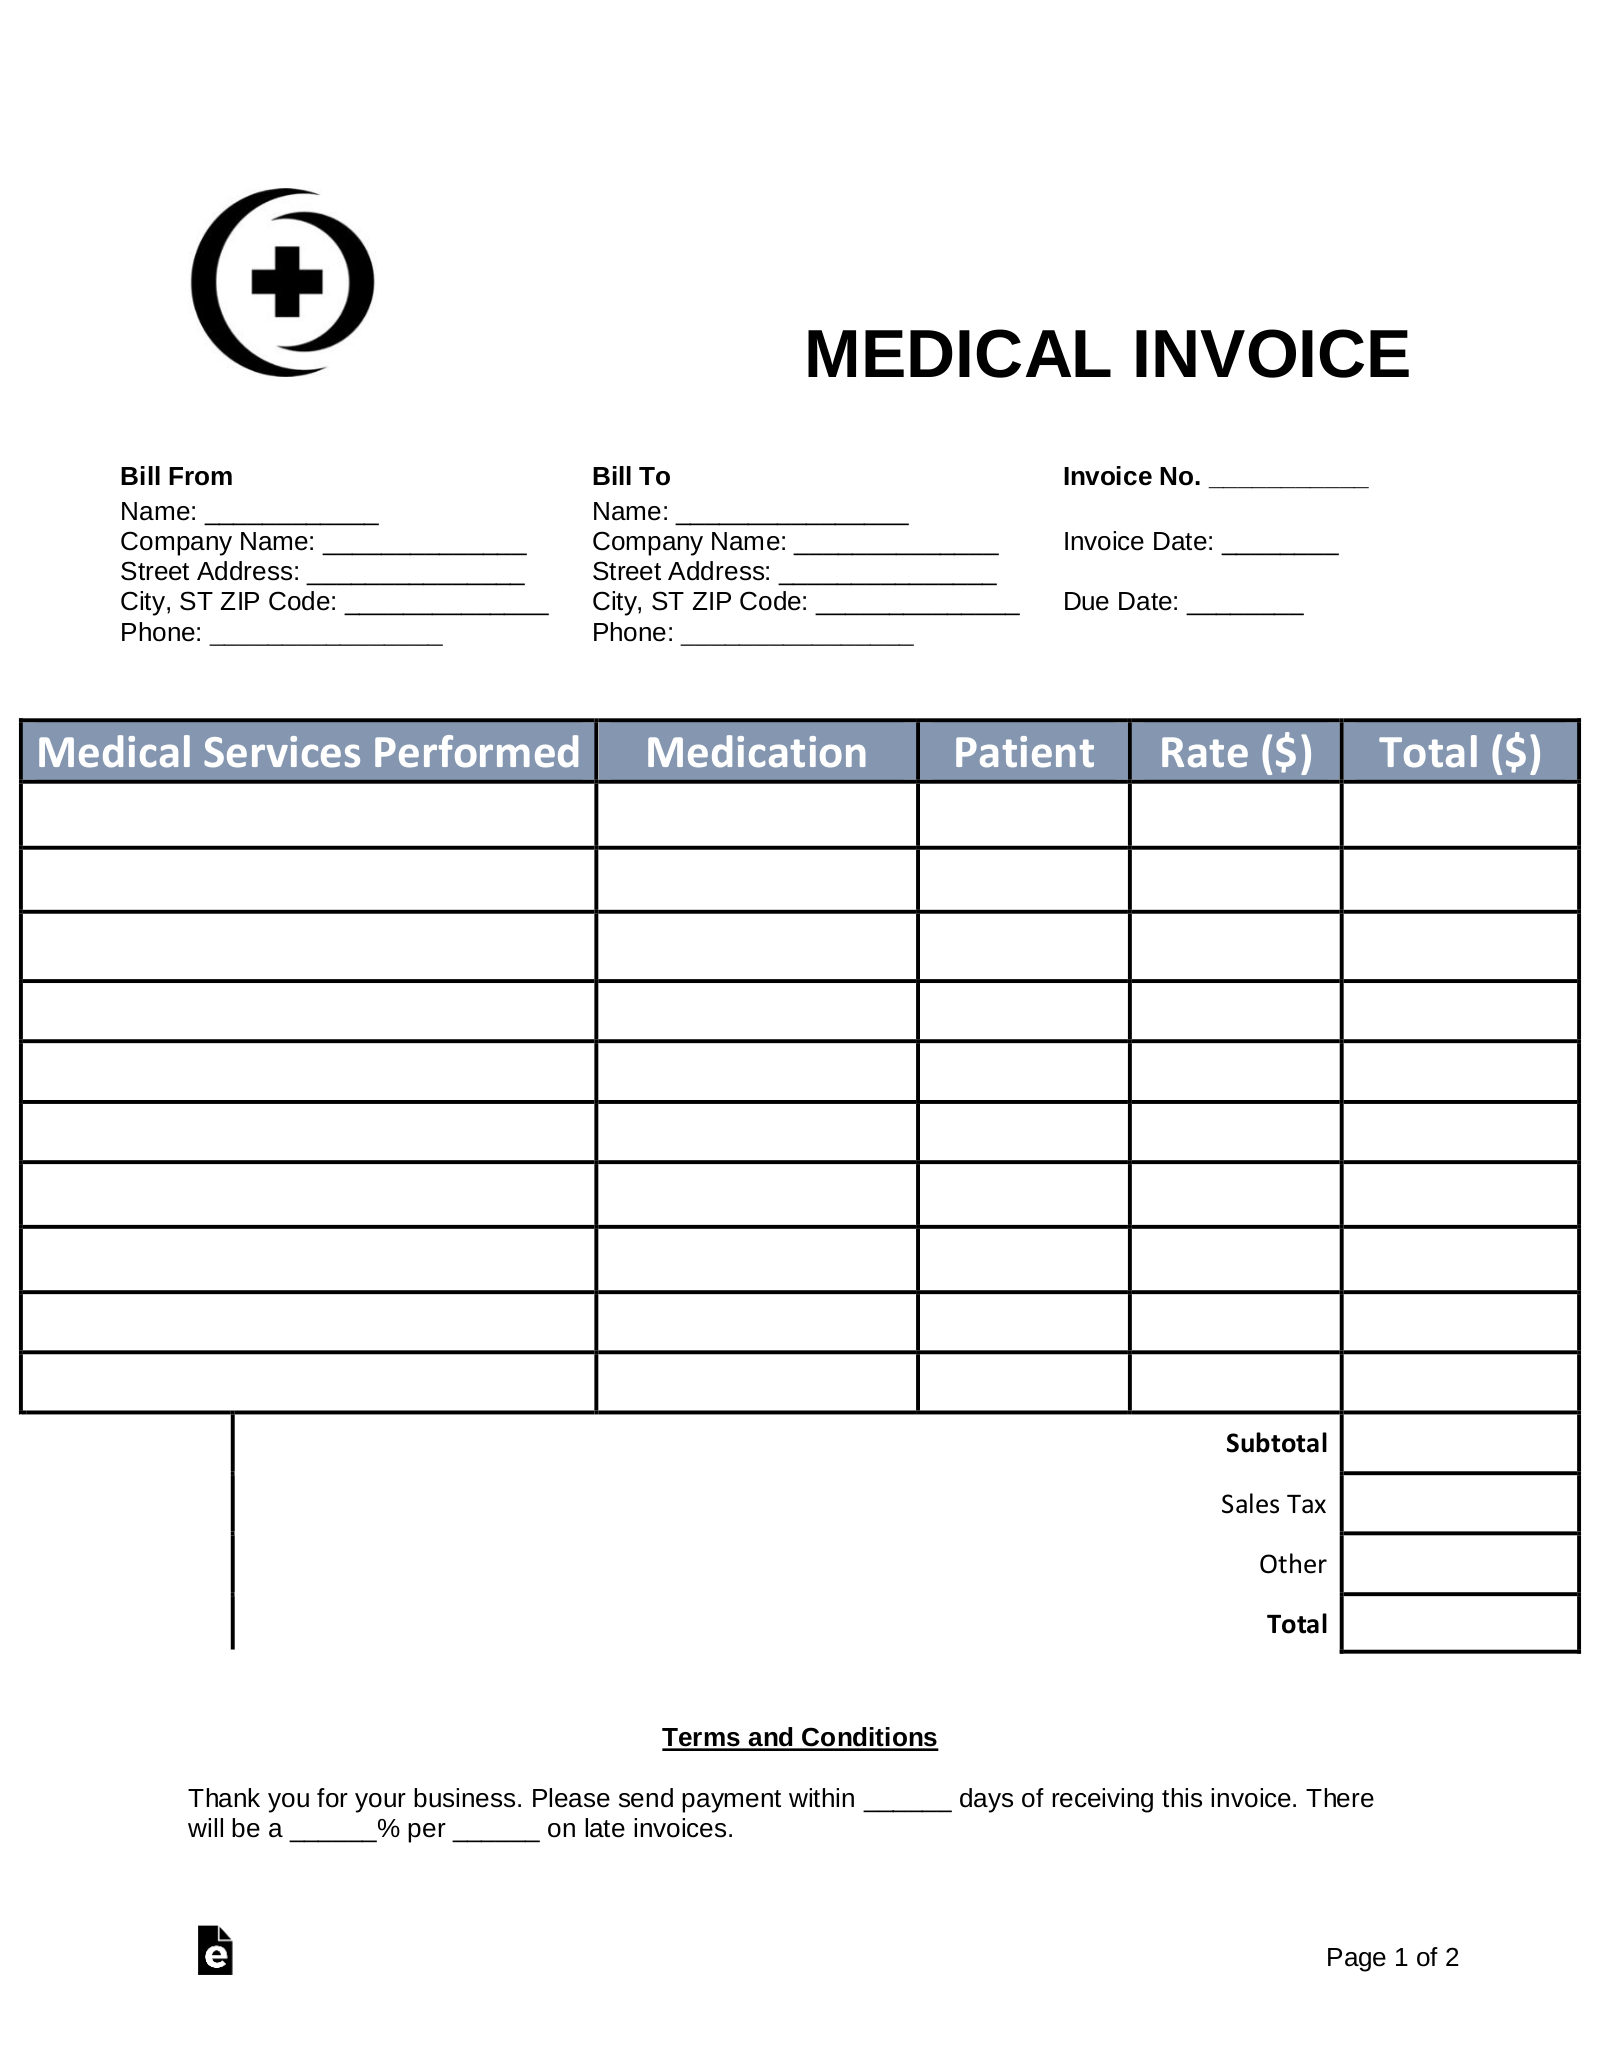 Free Medical Invoice Template - Word | PDF – eForms